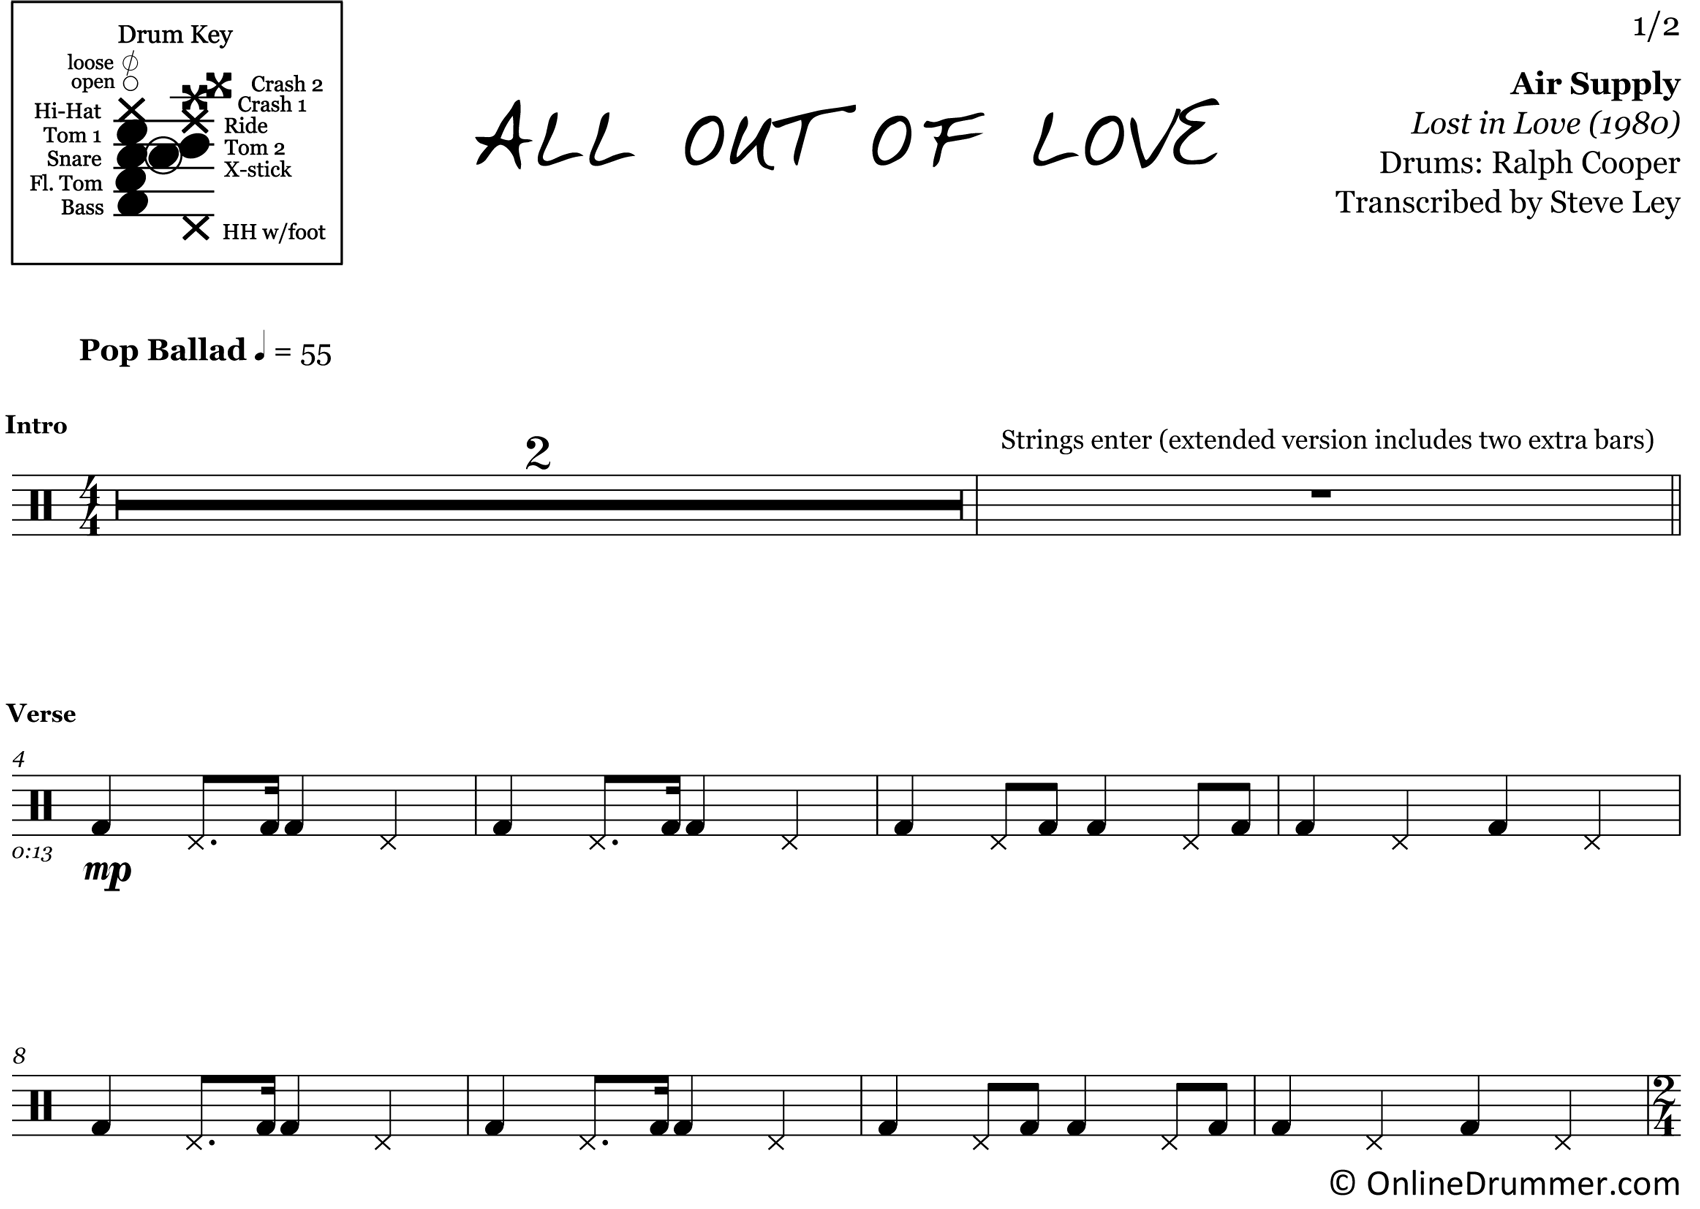 All Out of Love - Air Supply - Drum Sheet Music